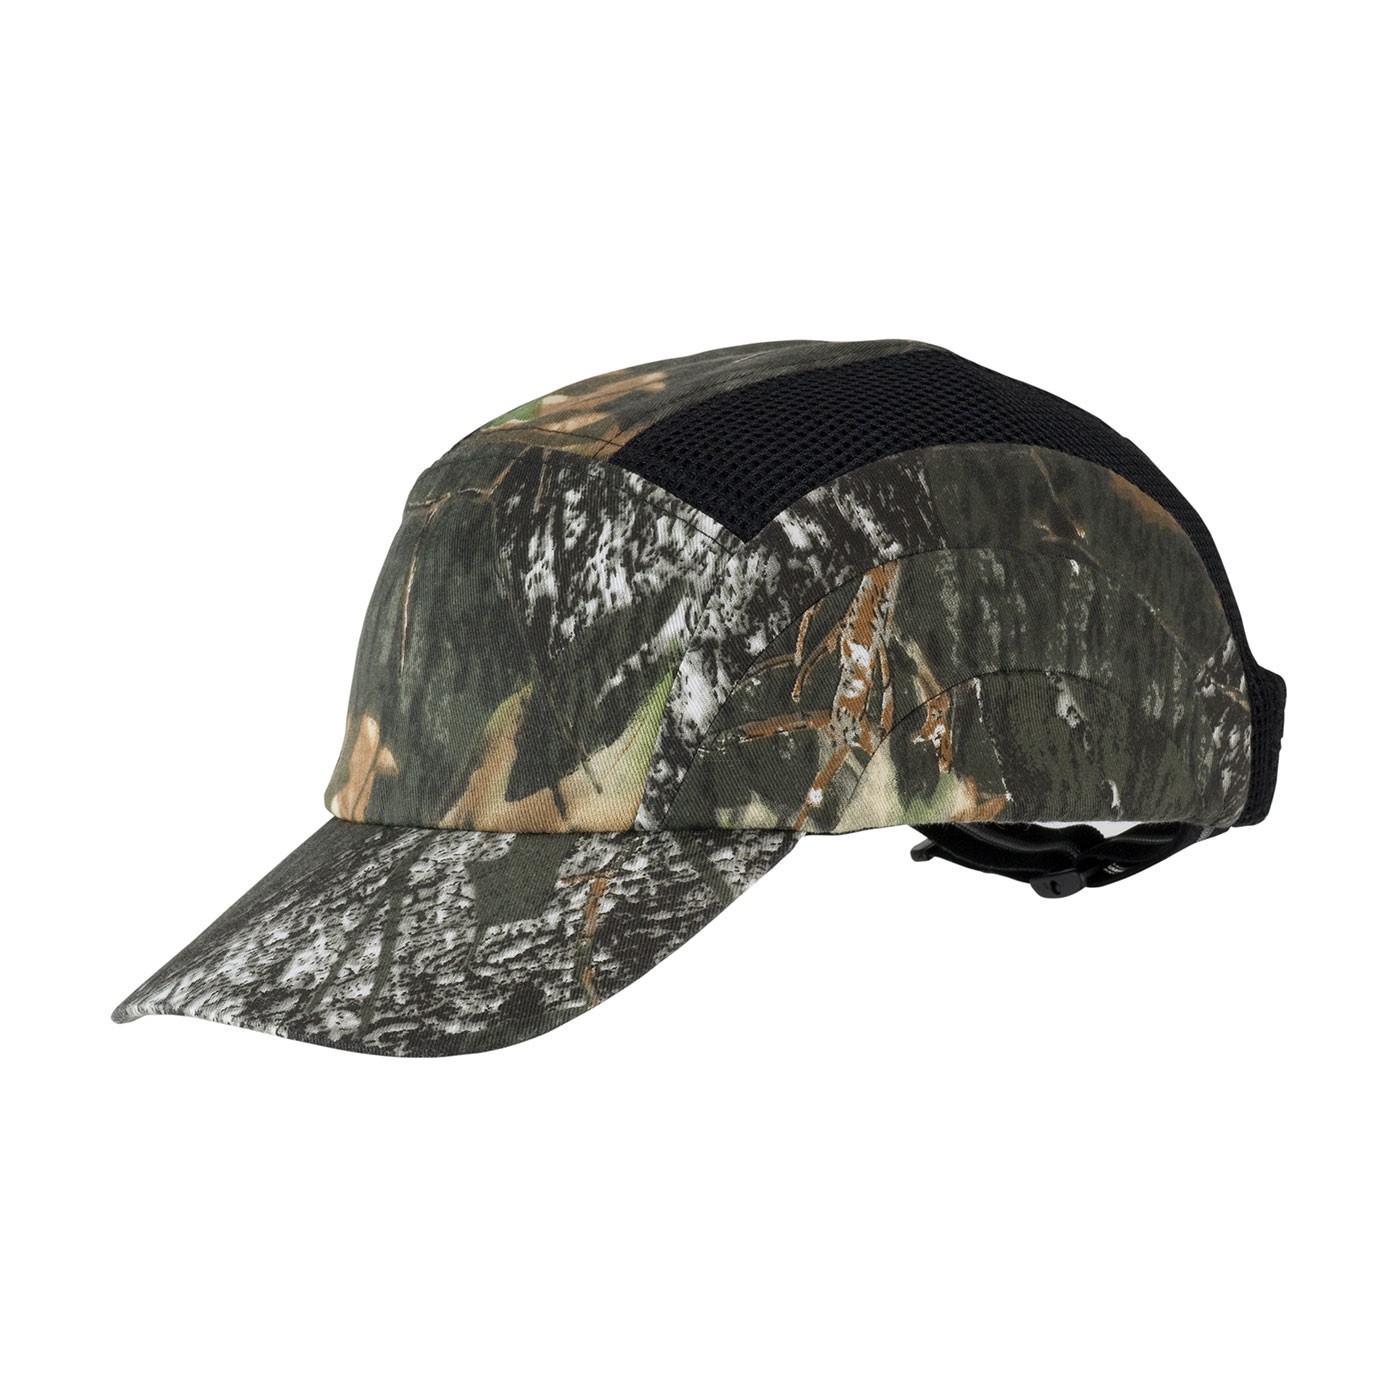 HardCap A1+™ Camouflage Baseball Style Bump Cap with HDPE Protective Liner and Adjustable Back  (#282-ABR170-CAMO)